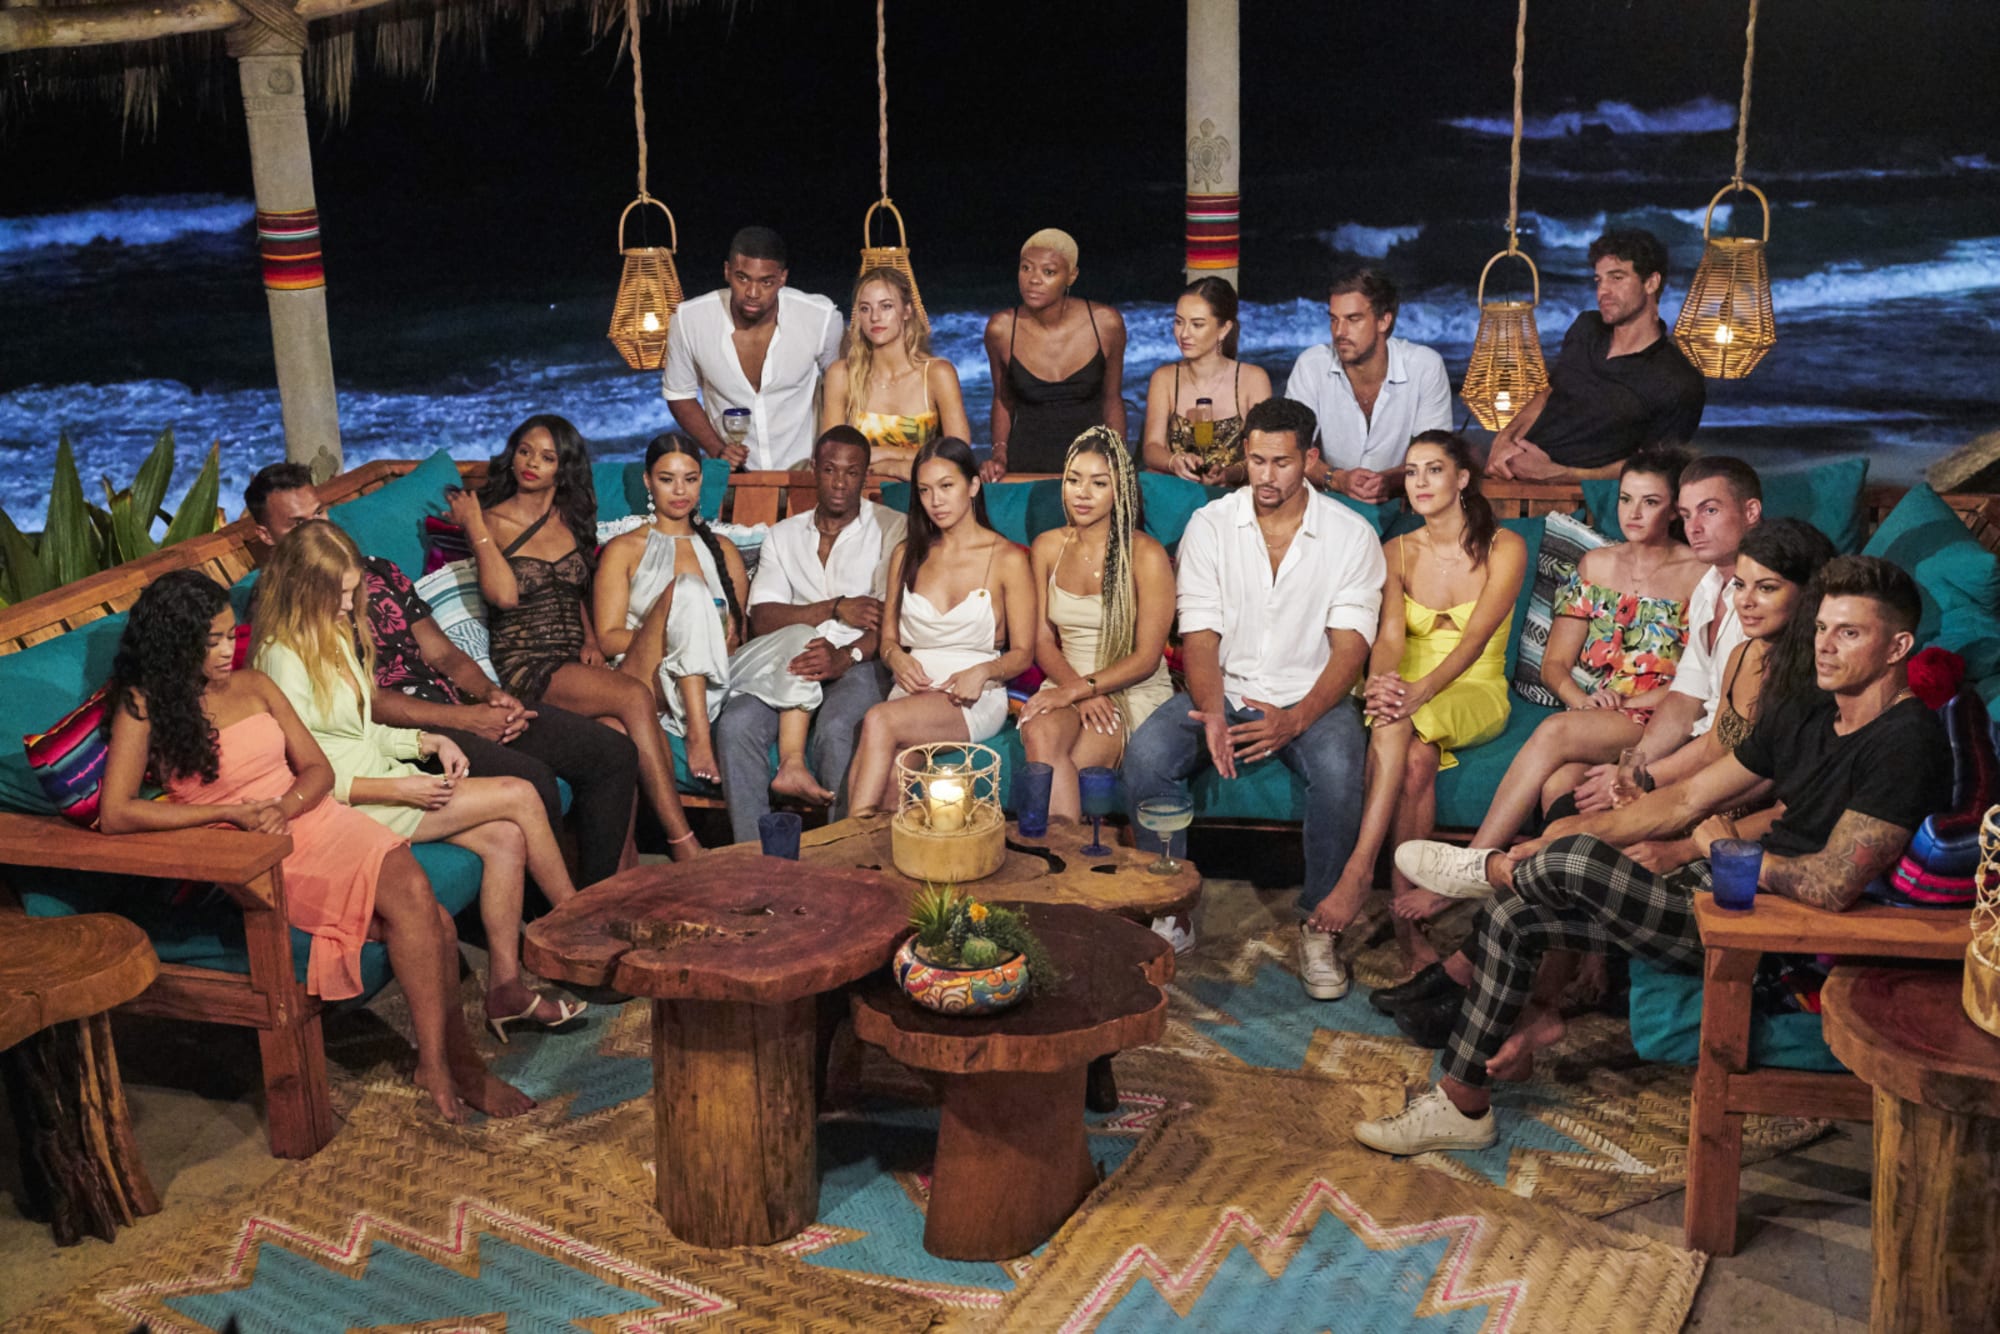 When does Bachelor in Paradise 2022 air on ABC?